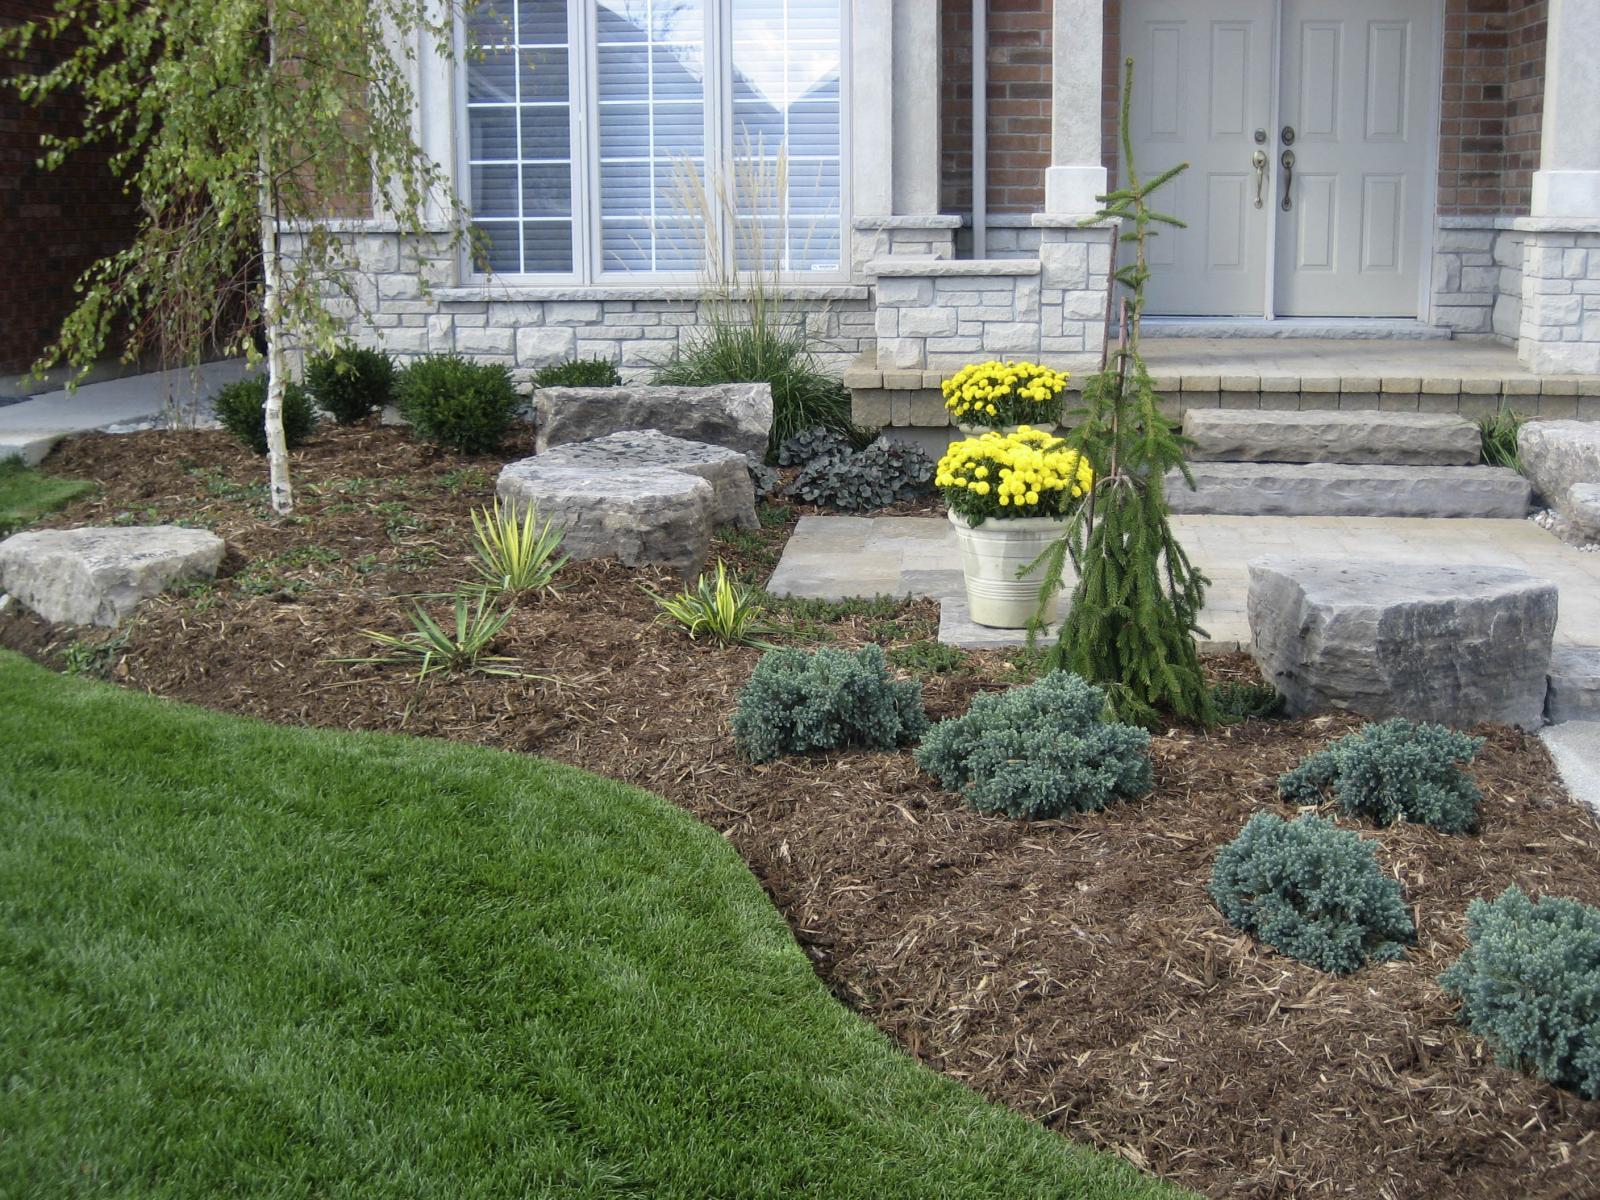 Landscape contractor rating system